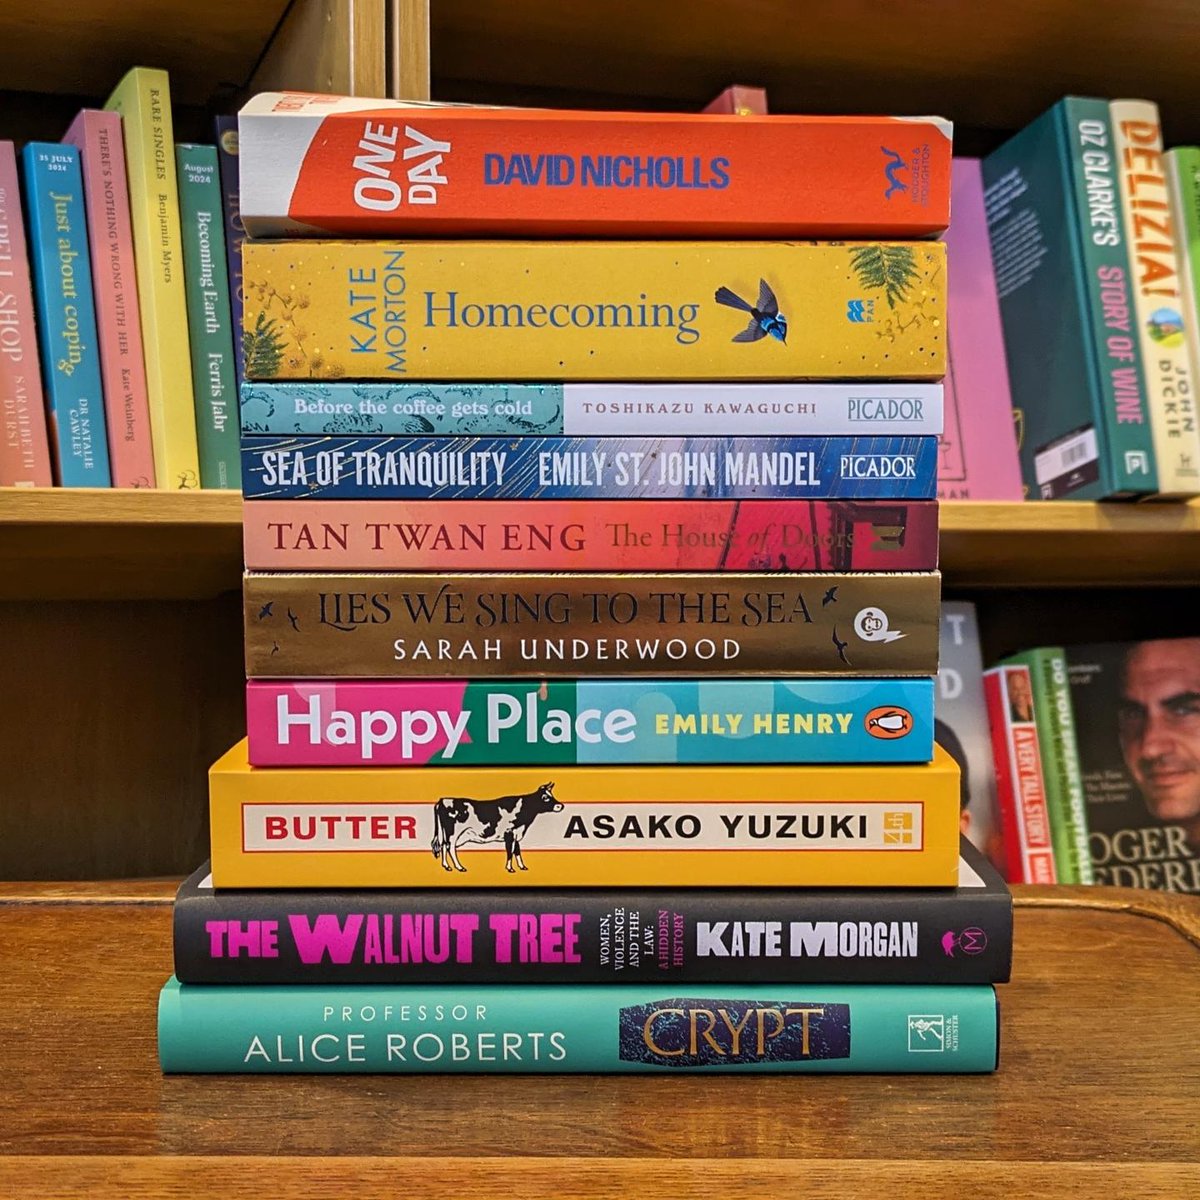 March bestsellers 1. One Day 2. Homecoming 3. Before the Coffee Gets cold @kawaguchicoffee 4. Sea of Tranquility 5. The House of Doors @TanTwanEng 6. Lies We Sing to the Sea @s_e_c_underwood 7. Happy Place 8. Butter 9. The Walnut Tree 10. Crypt @theAliceRoberts